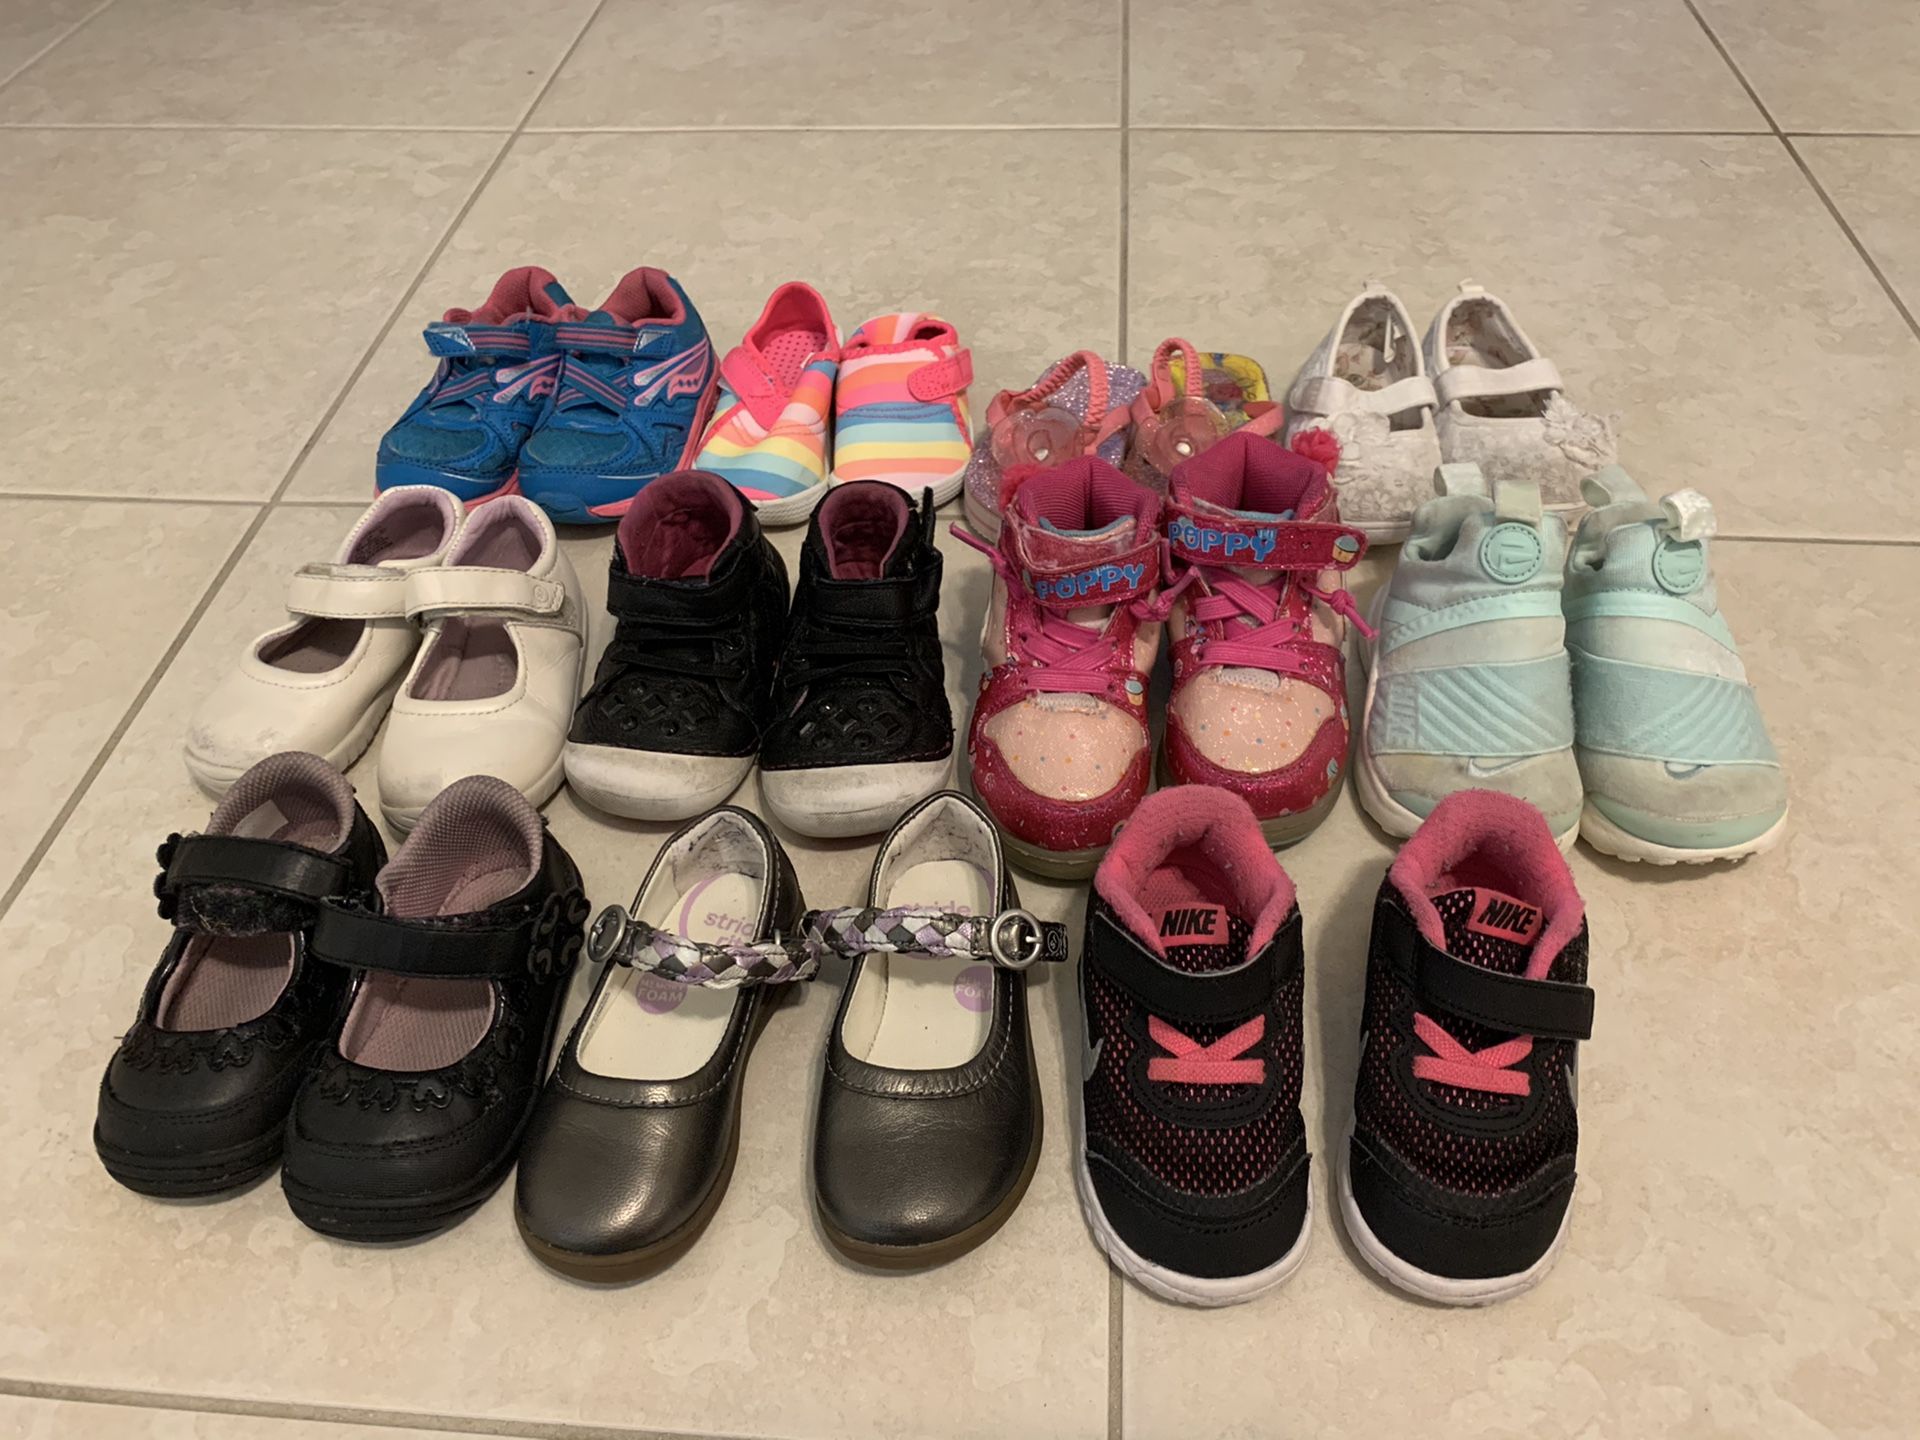 Used toddler girl shoes. All are name brand- Nike, Stride Rite, and Saucony